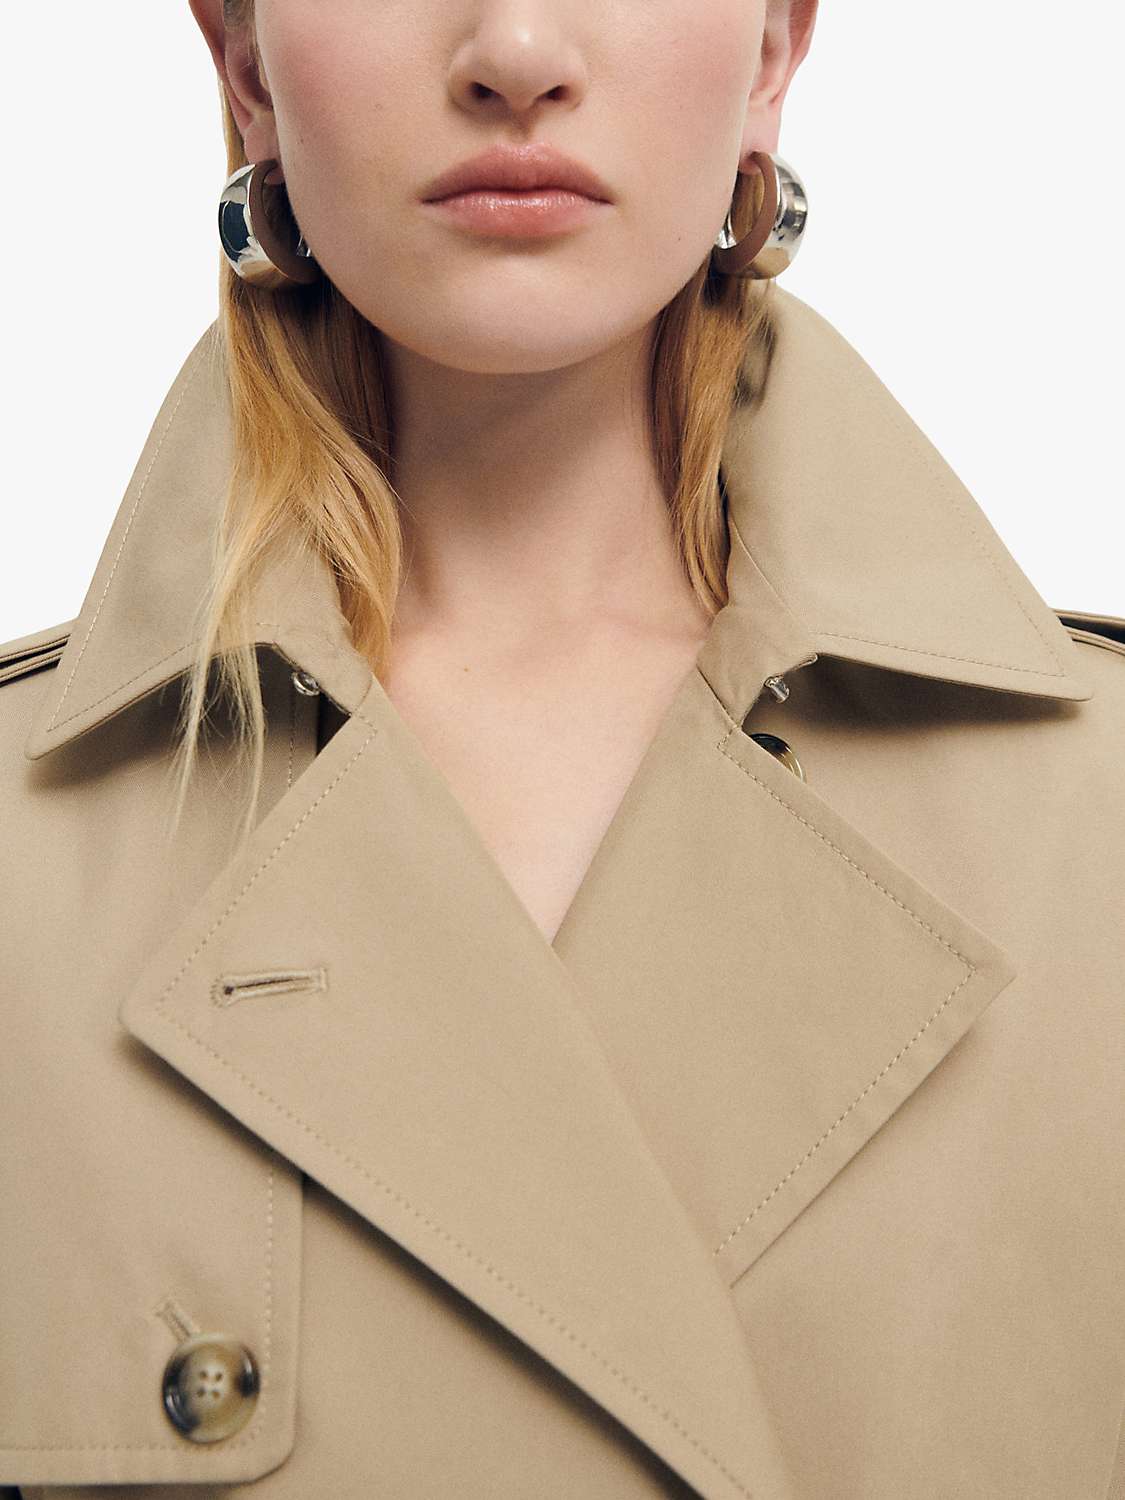 Buy Mango Eiffel Double Breasted Cotton Blend Trench Coat, Light Beige Online at johnlewis.com